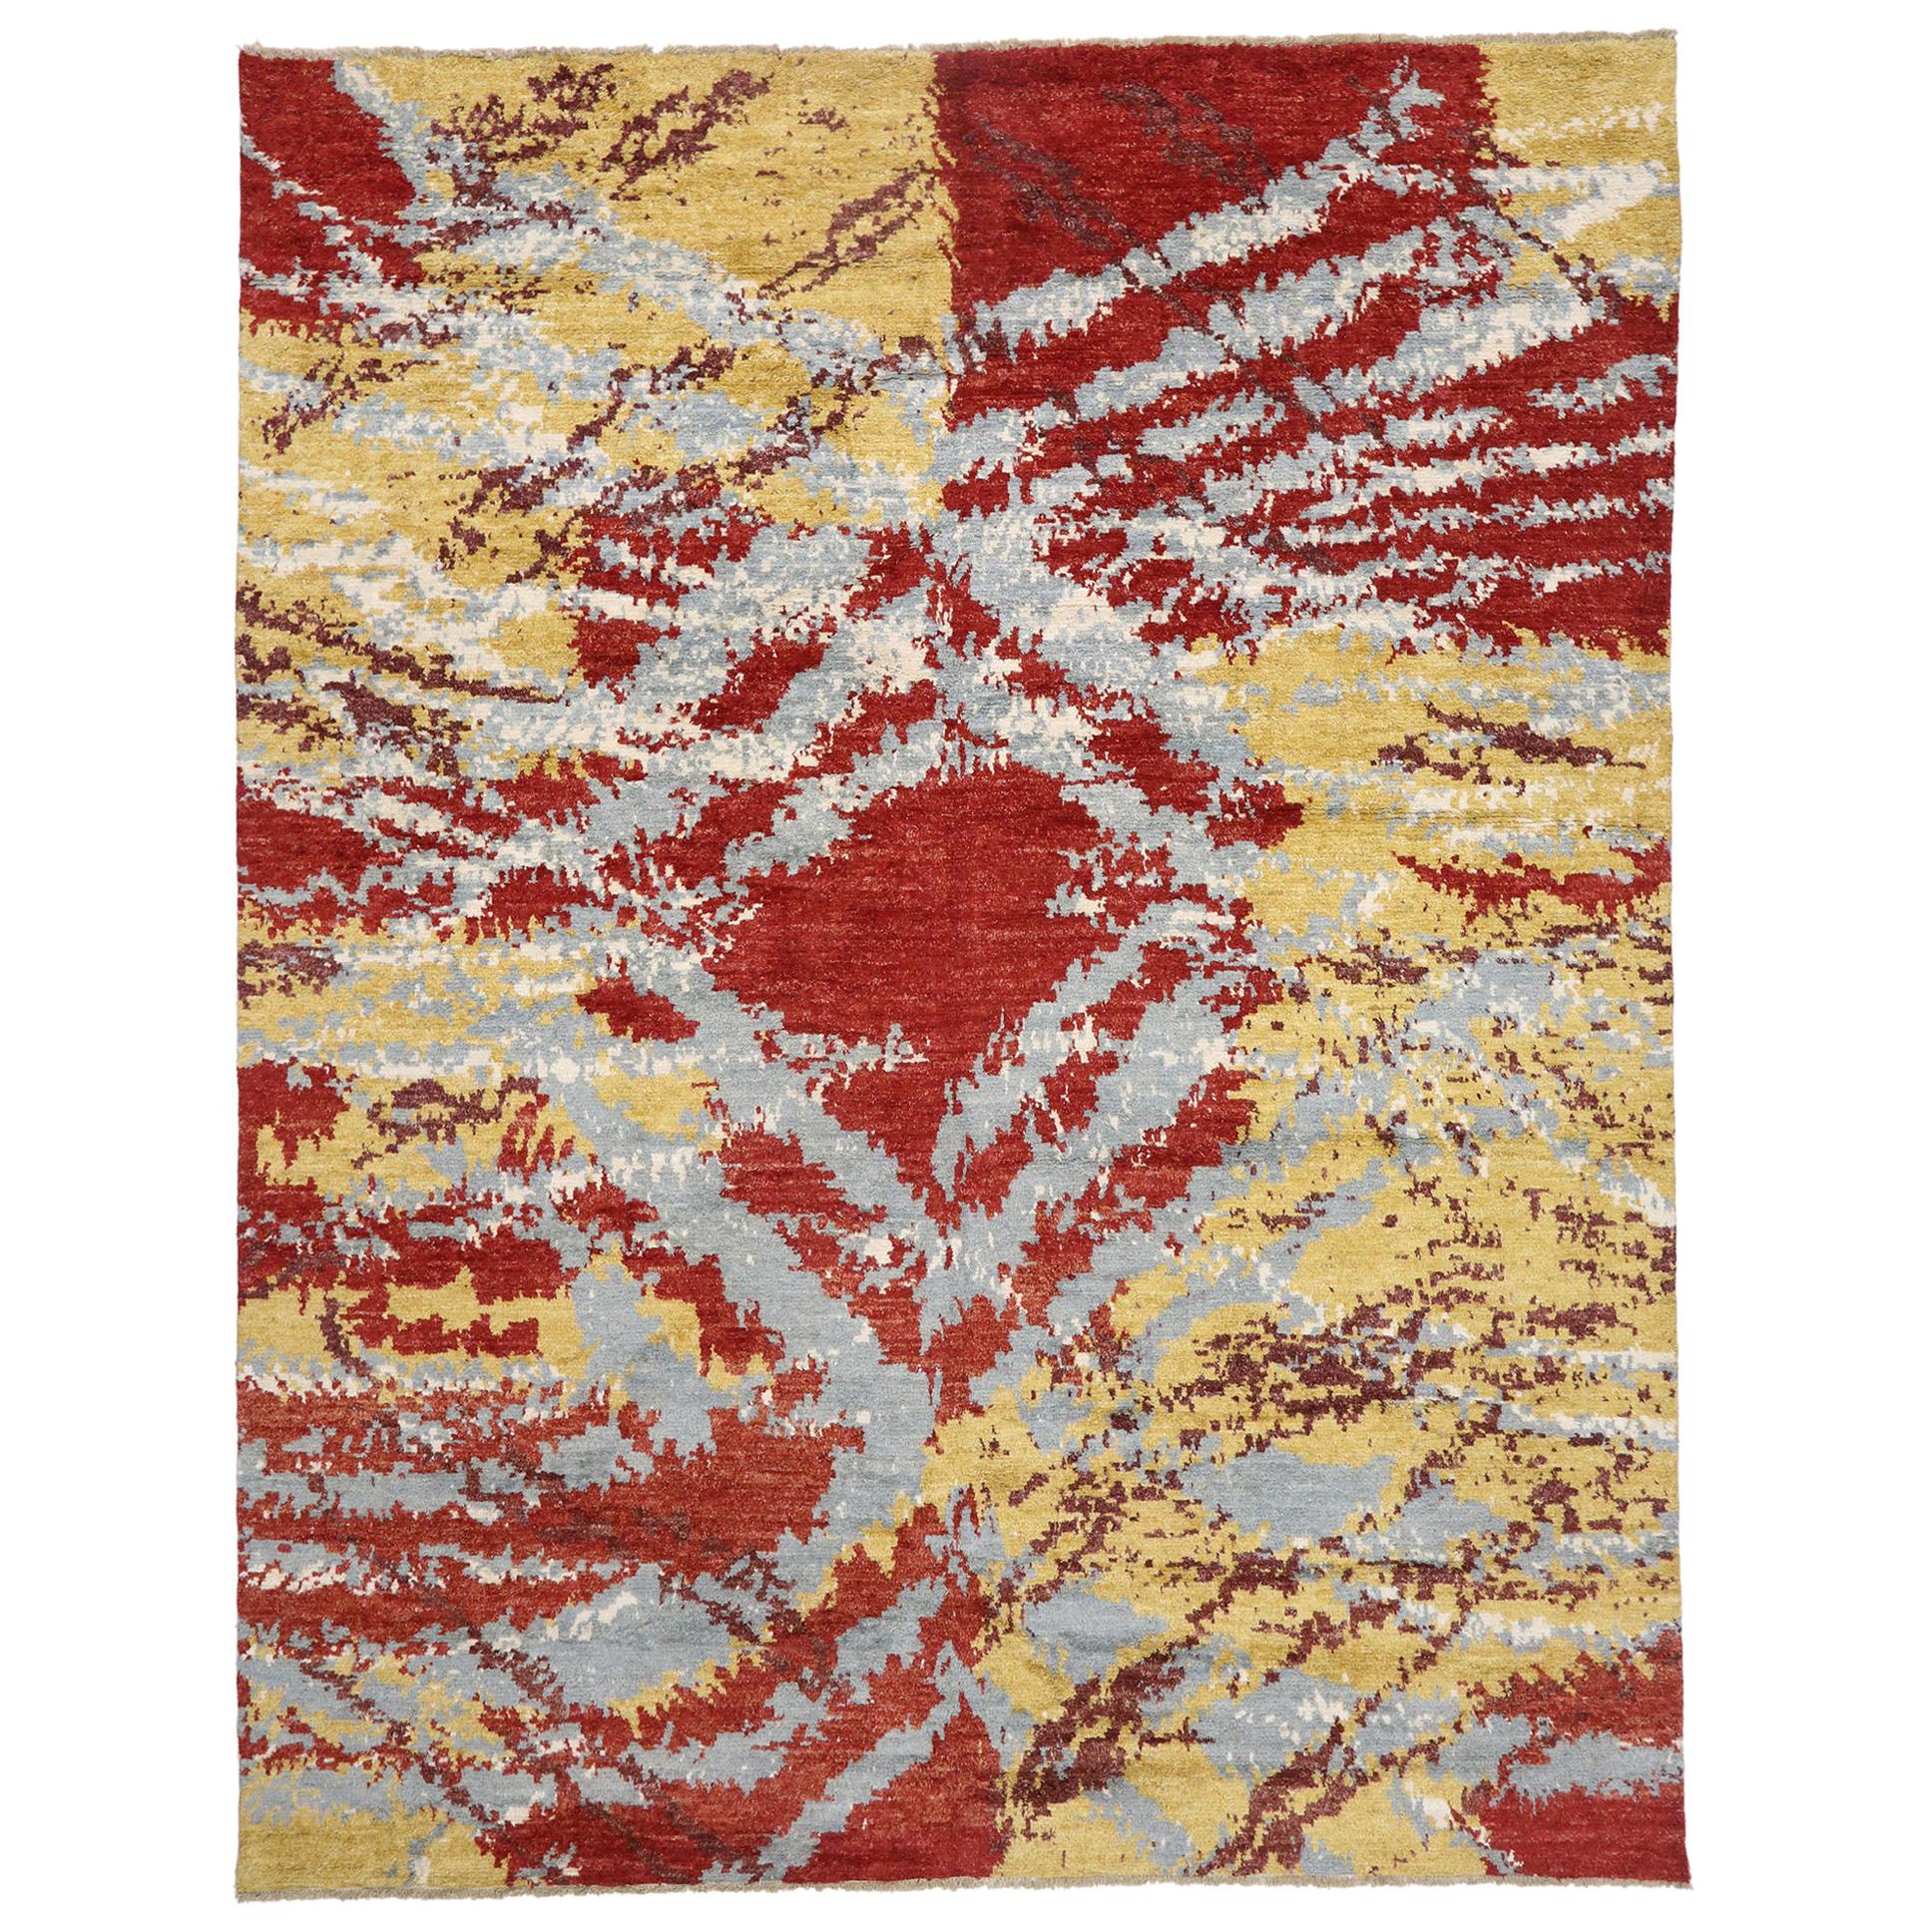 New Contemporary Moroccan Rug with Abstract Expressionism & Post-Modern Style